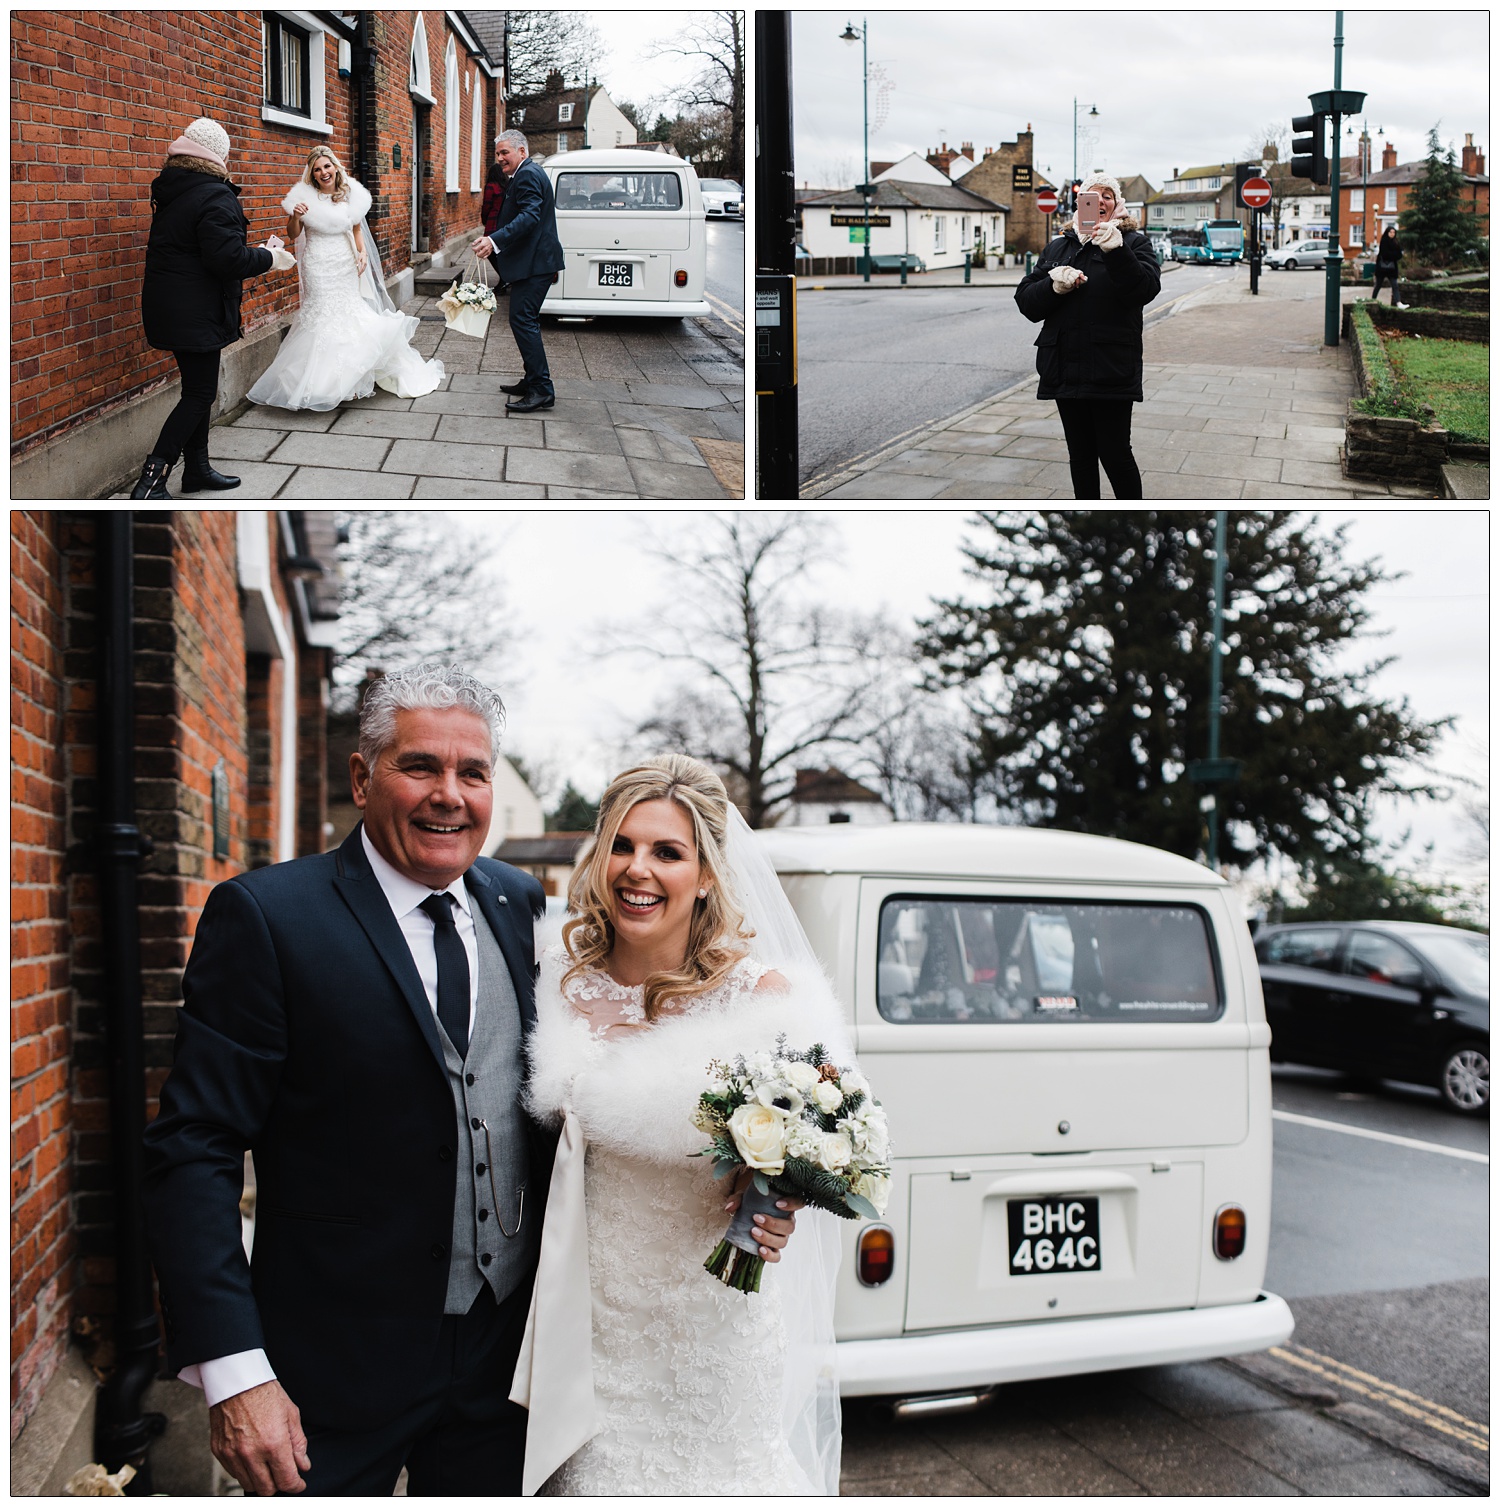 Bride arrives with her father at a wedding venue in Rayleigh and a random passer-by takes a photo with their phone.